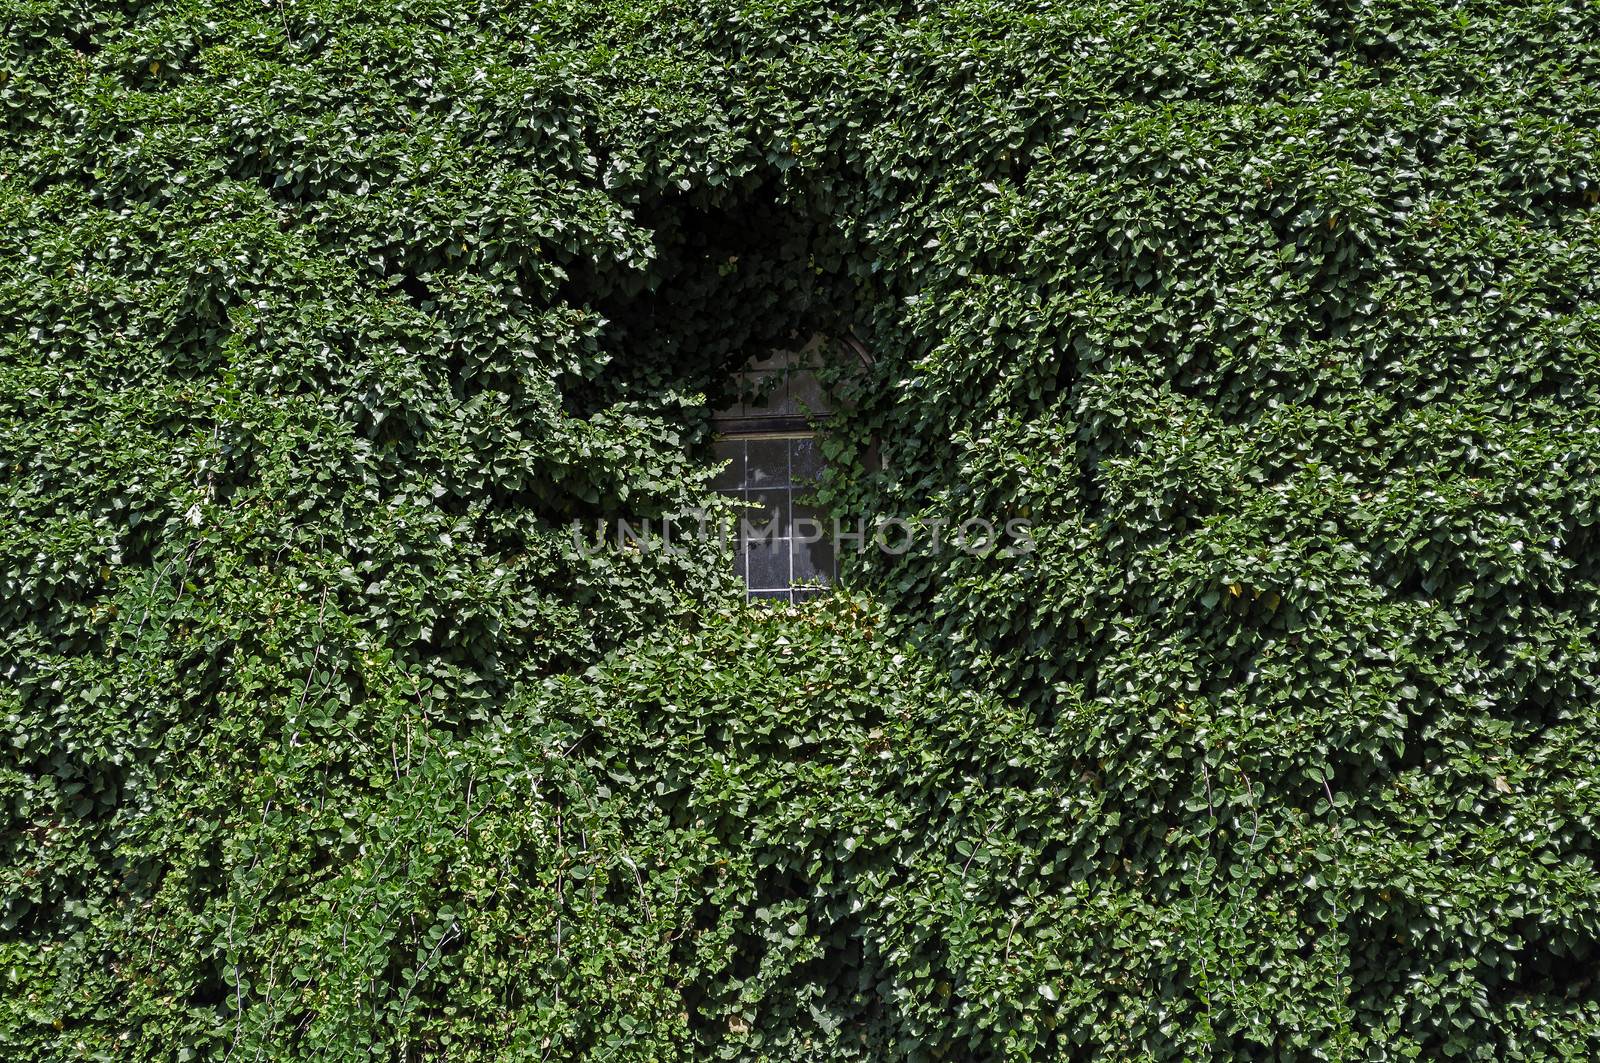 Ivy covered window. by FER737NG